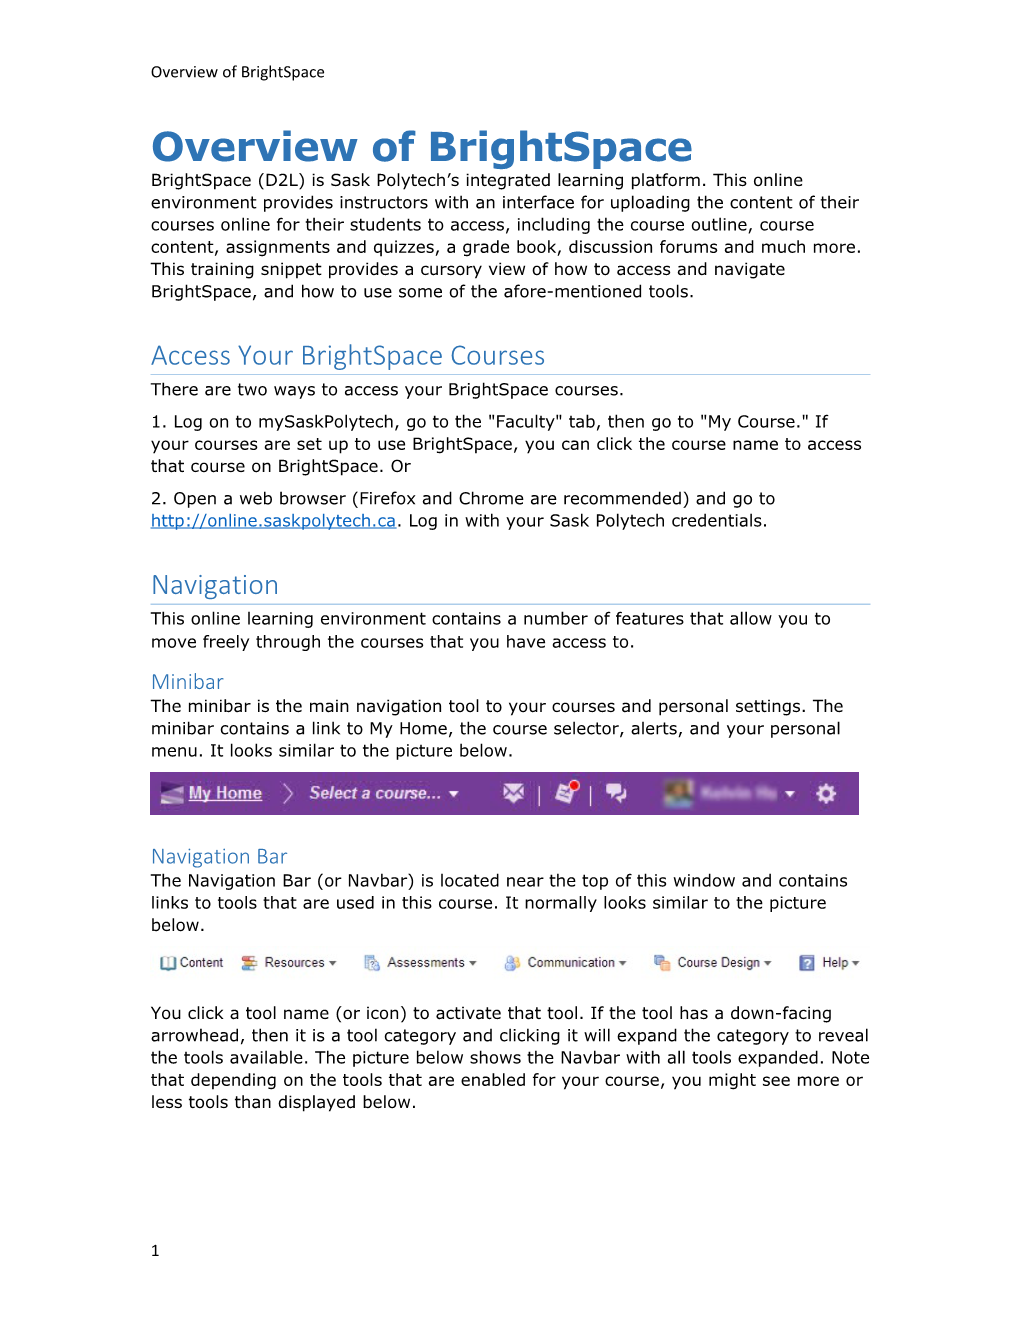 Overview of Brightspace